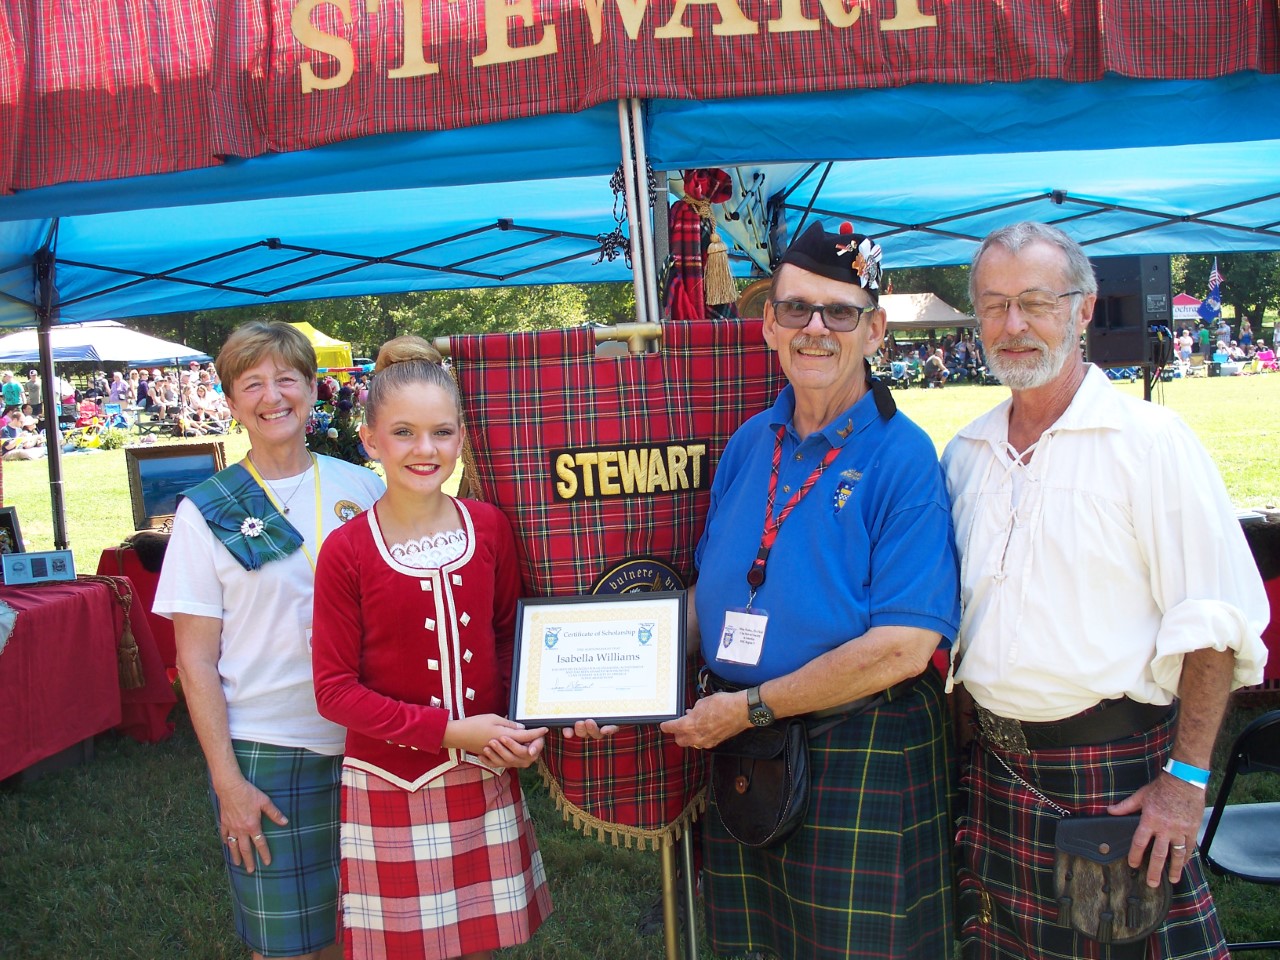 clan members in front of the Clan Stewart tent